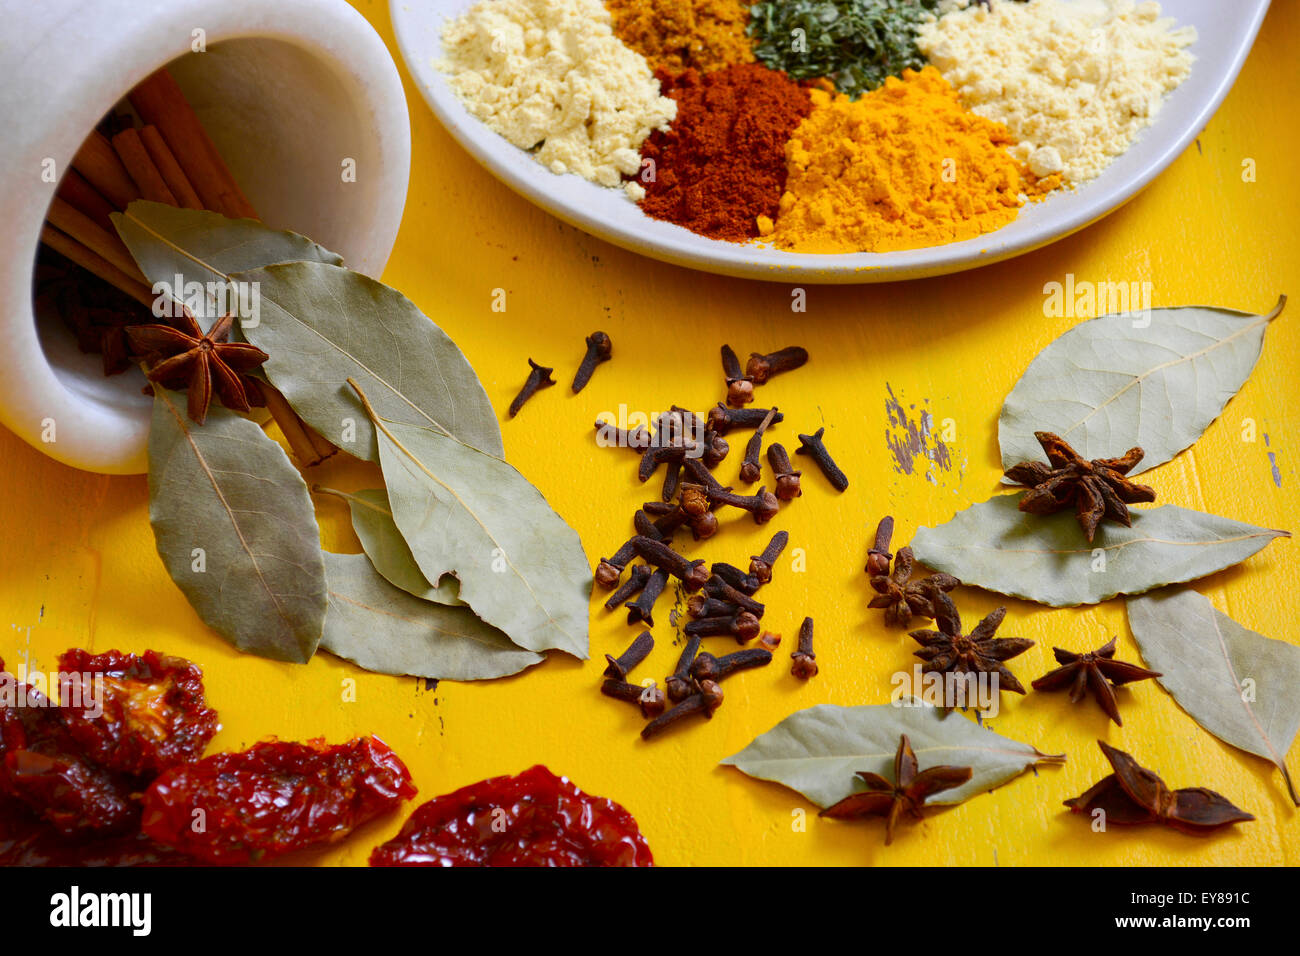 Colorful cooking spices and herbs on a round plate with cinnamon sticks, bay leaves and star anise in mortar and pestle on yello Stock Photo